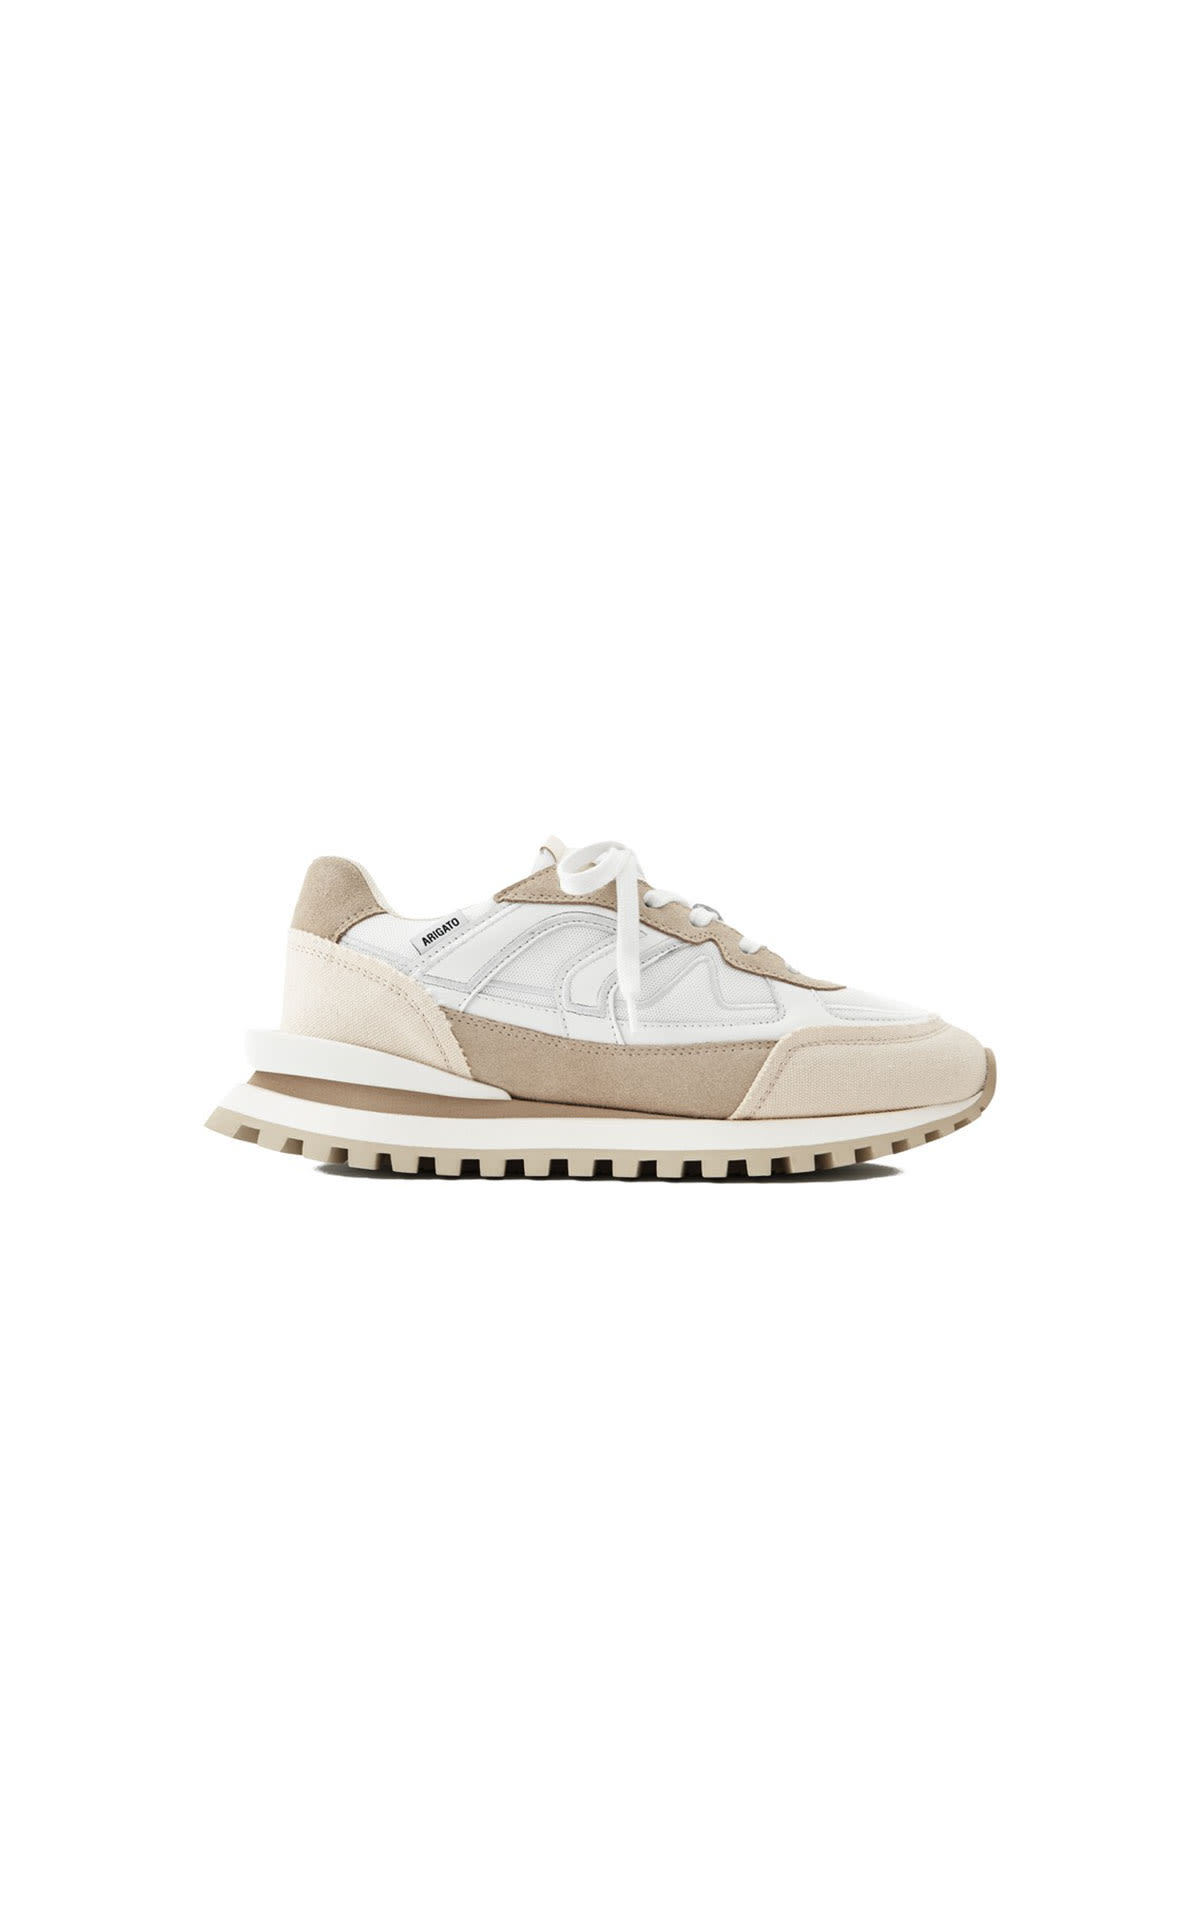 Axel Arigato Sonar sneakers women from Bicester Village